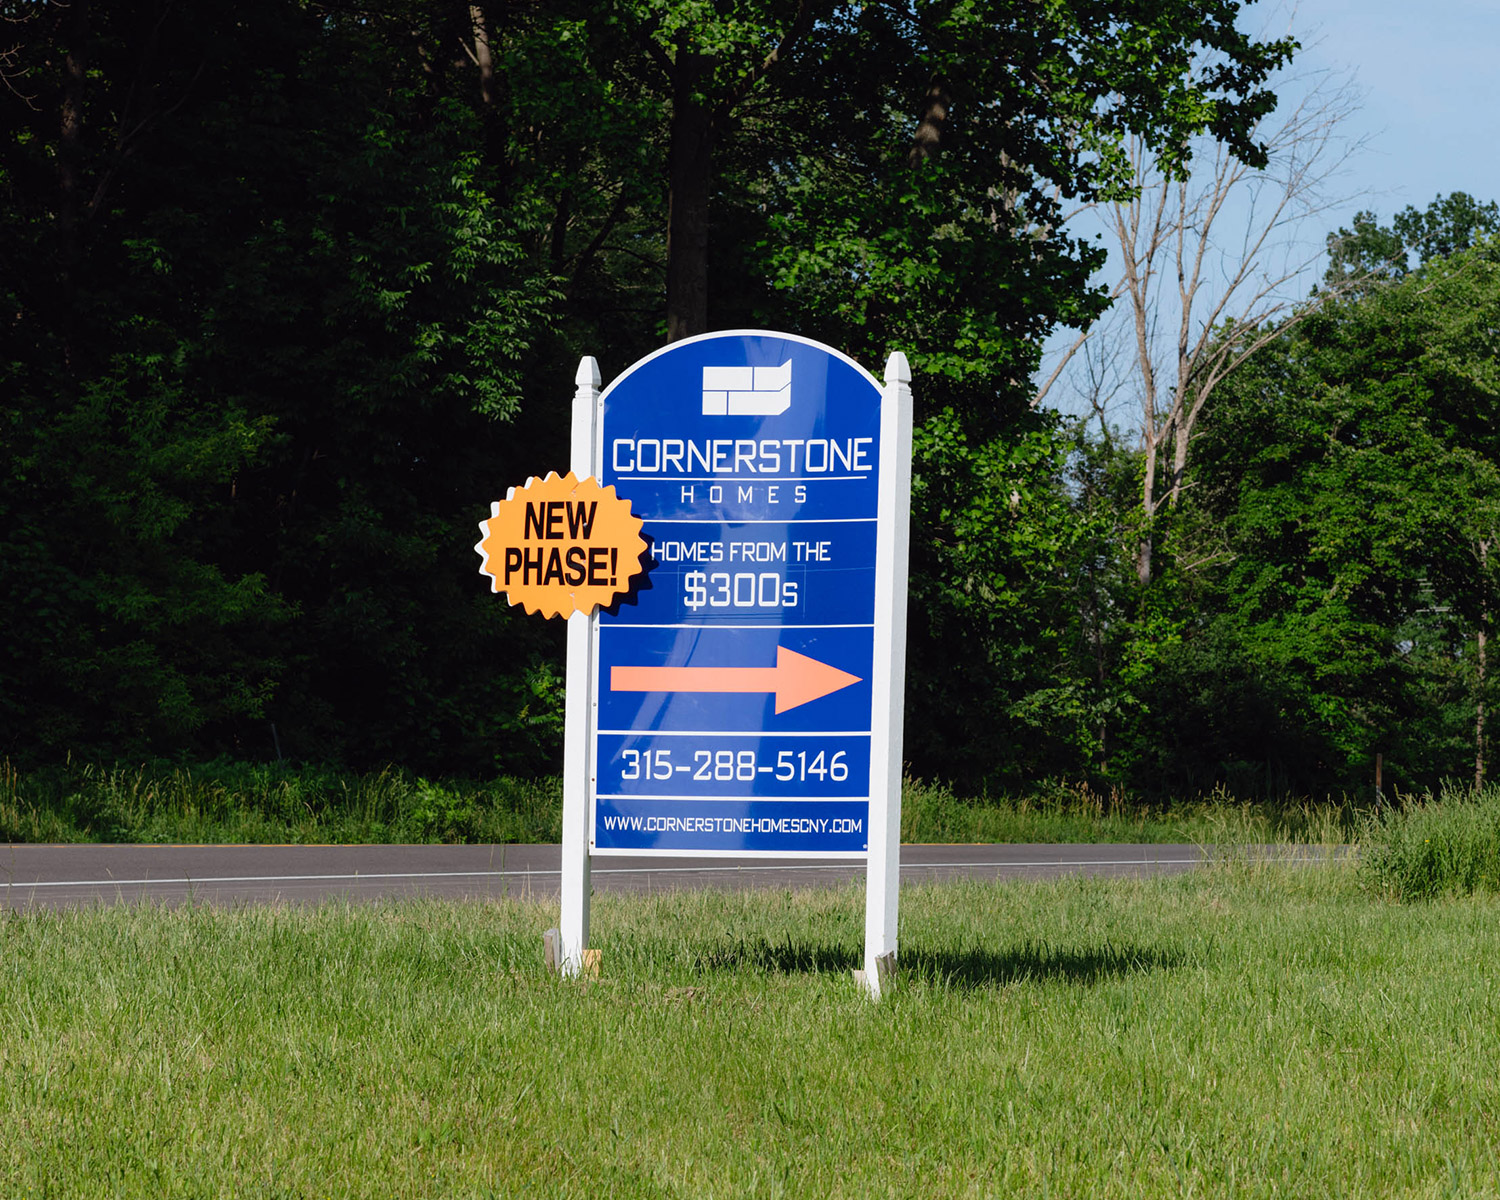 A sign for a suburban housing development in a grassy lot.